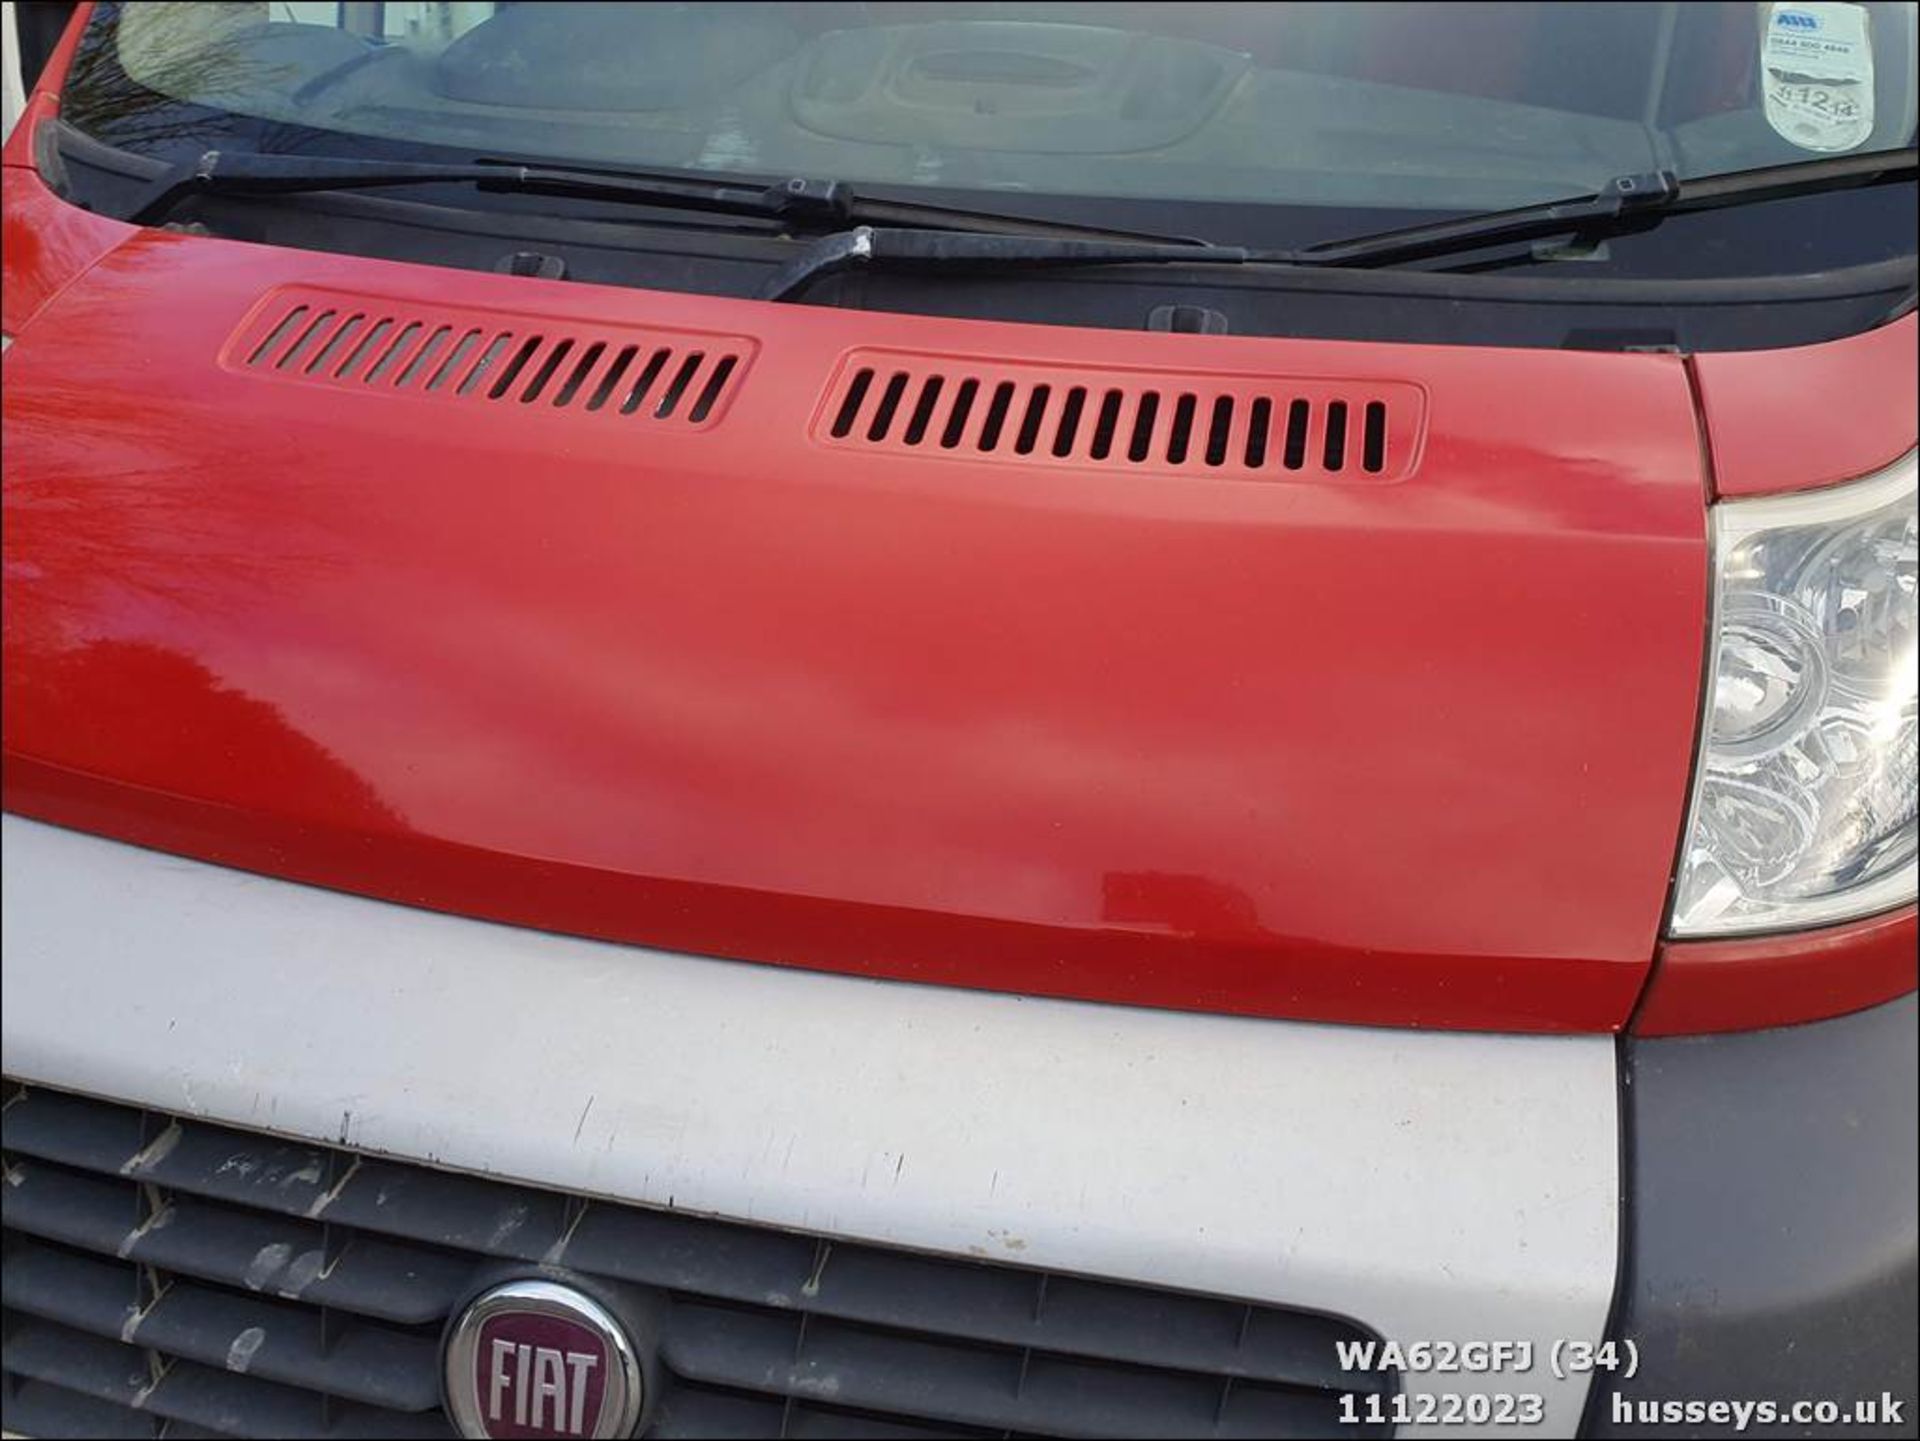 12/62 FIAT DUCATO 35 MULTIJET - 2287cc 2.dr Flat Bed (Red) - Image 35 of 52